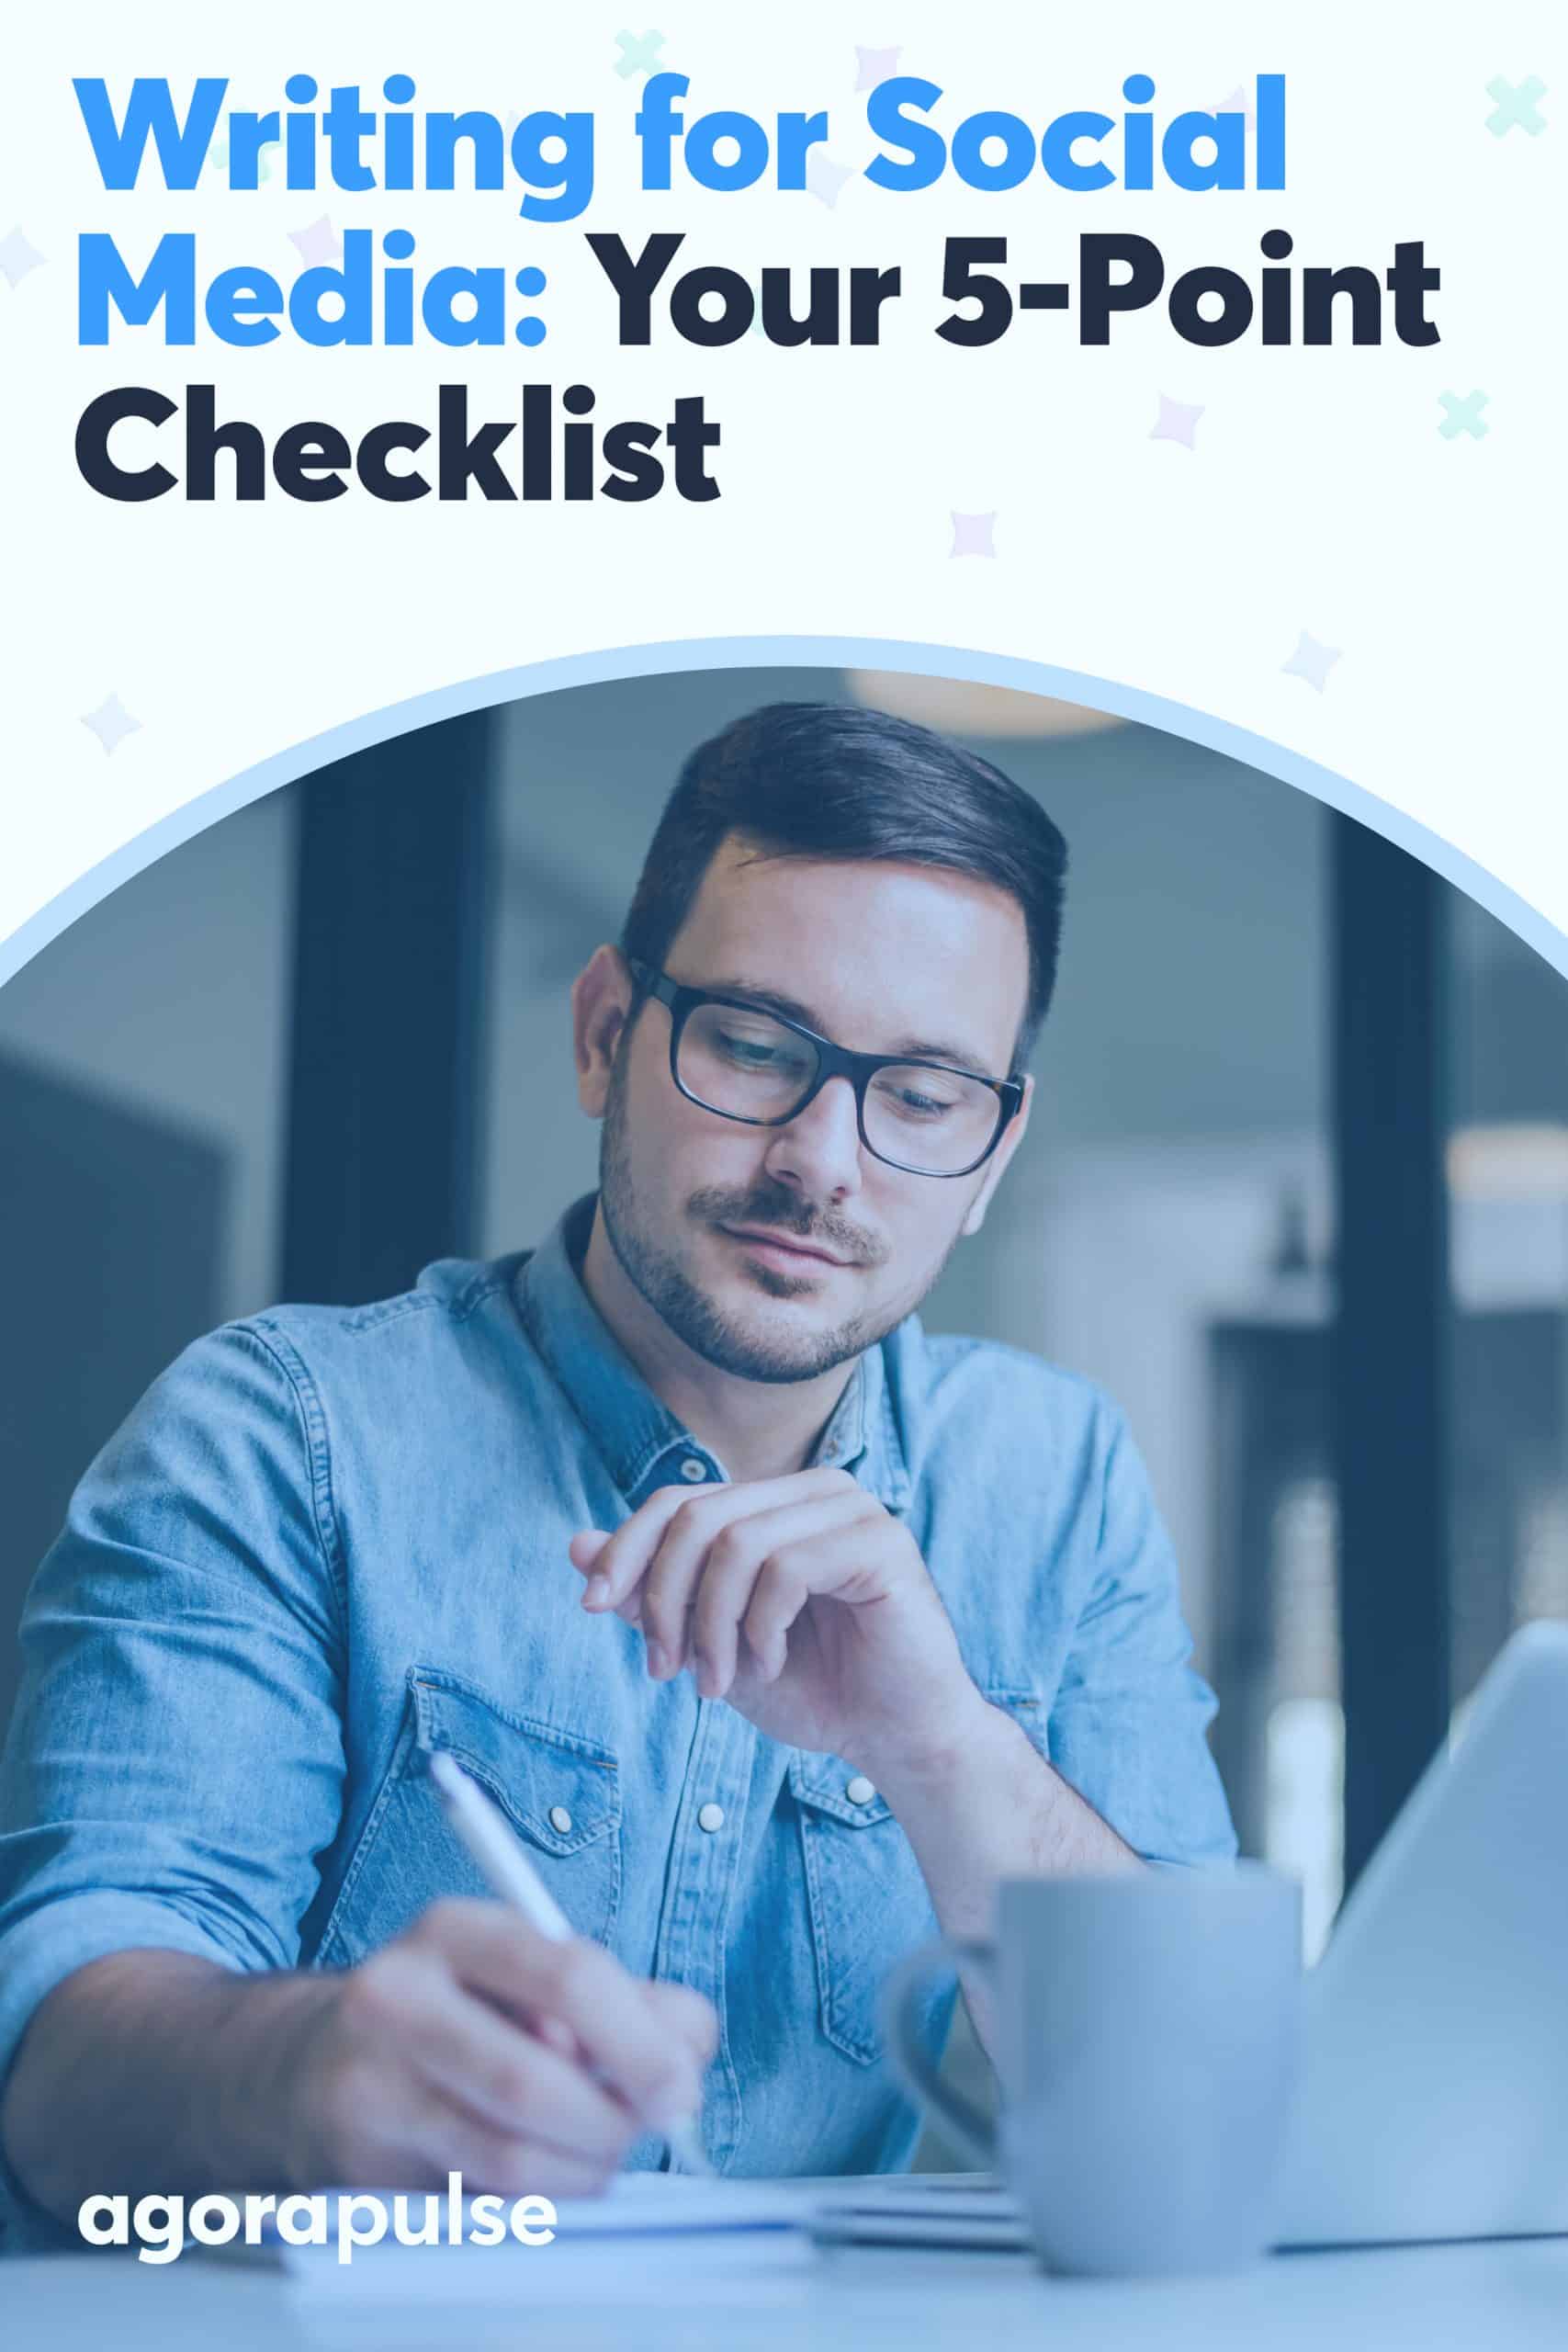 Writing for Social Media: Your 5-Point Checklist